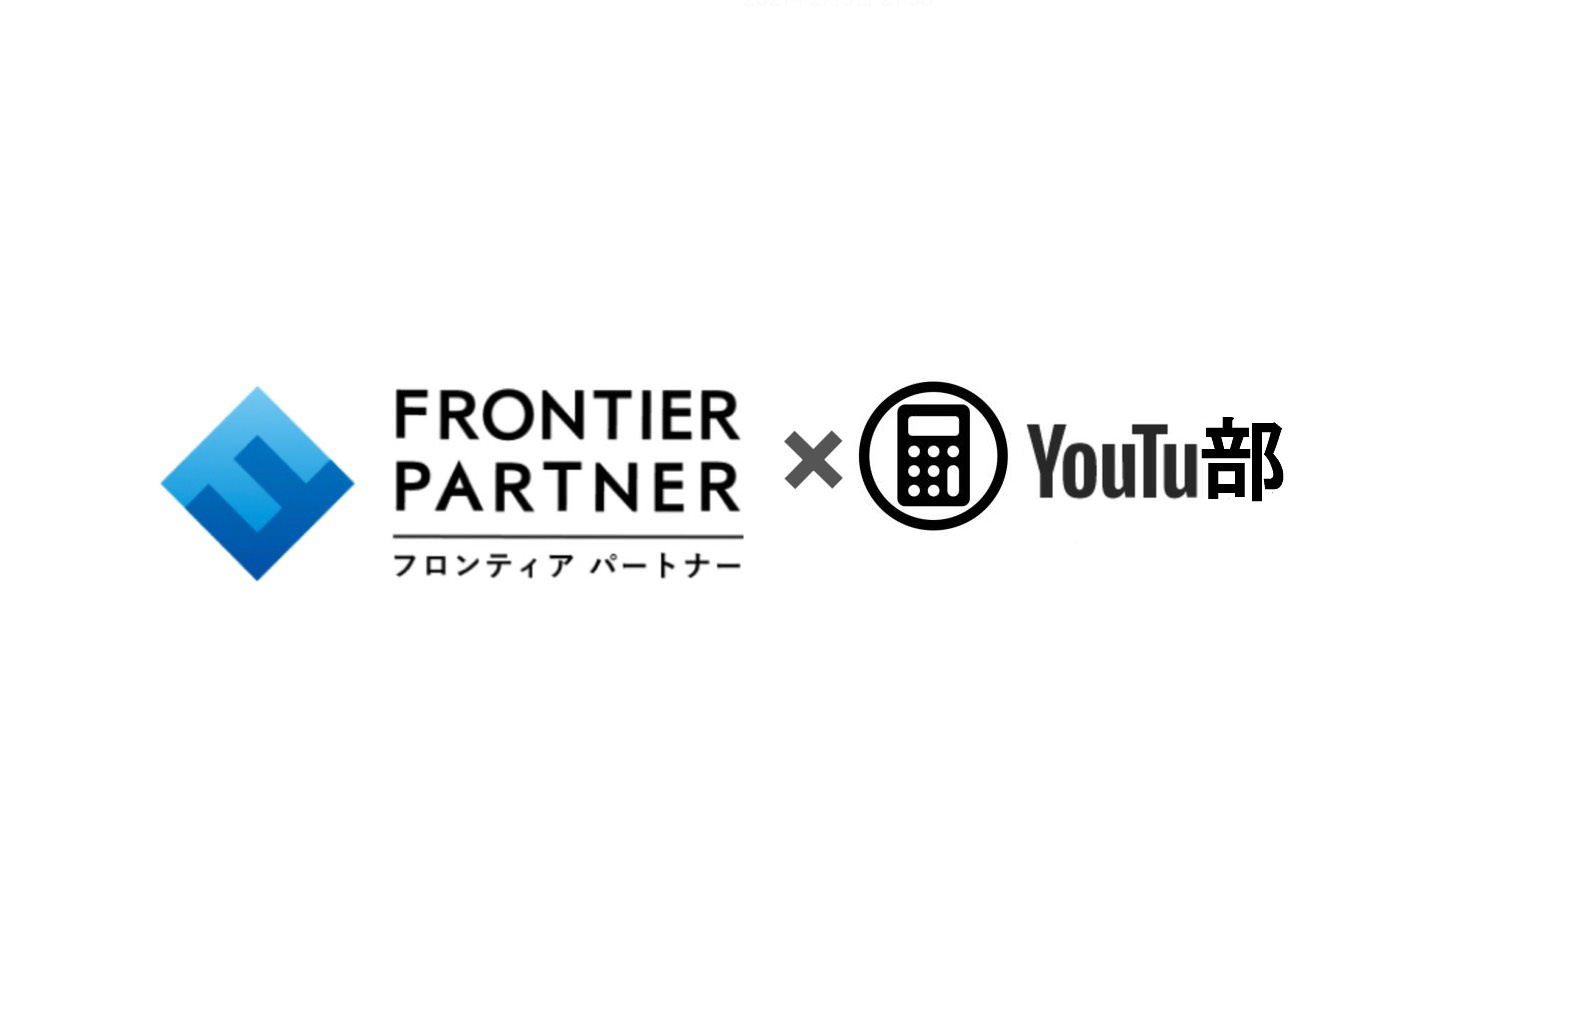 Fpc×YouTu部　記念すべき1回目配信！